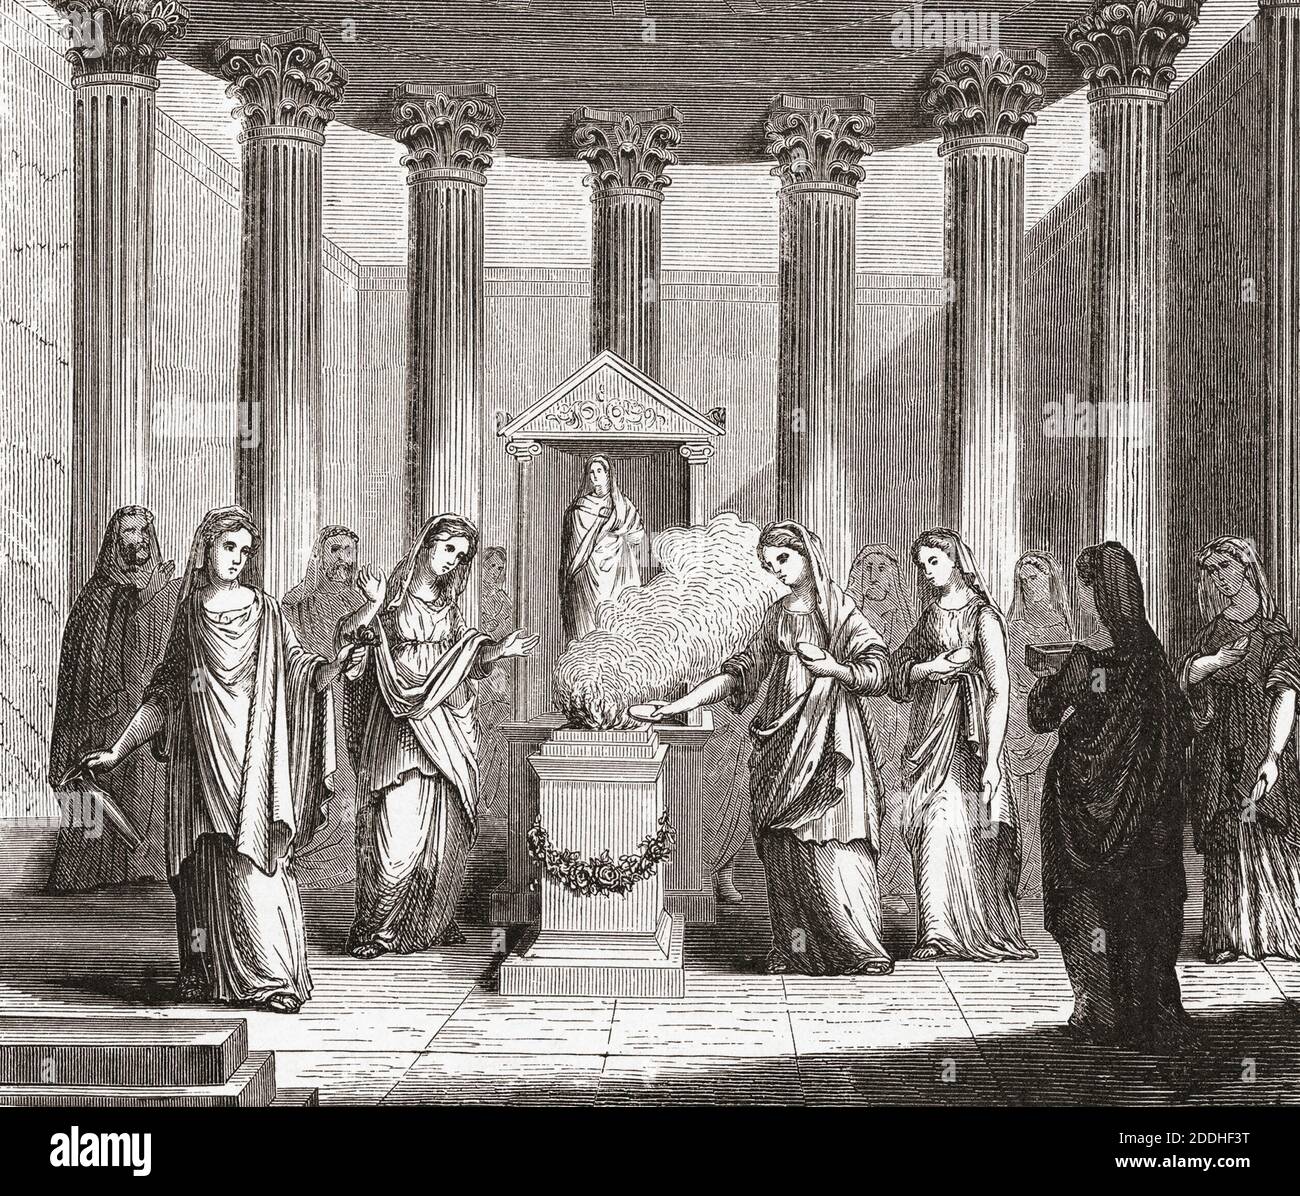 Vestal Virgins in ancient Rome tending the sacred fire in their temple.  After a 19th century illustration by an unidentified artist. Stock Photo